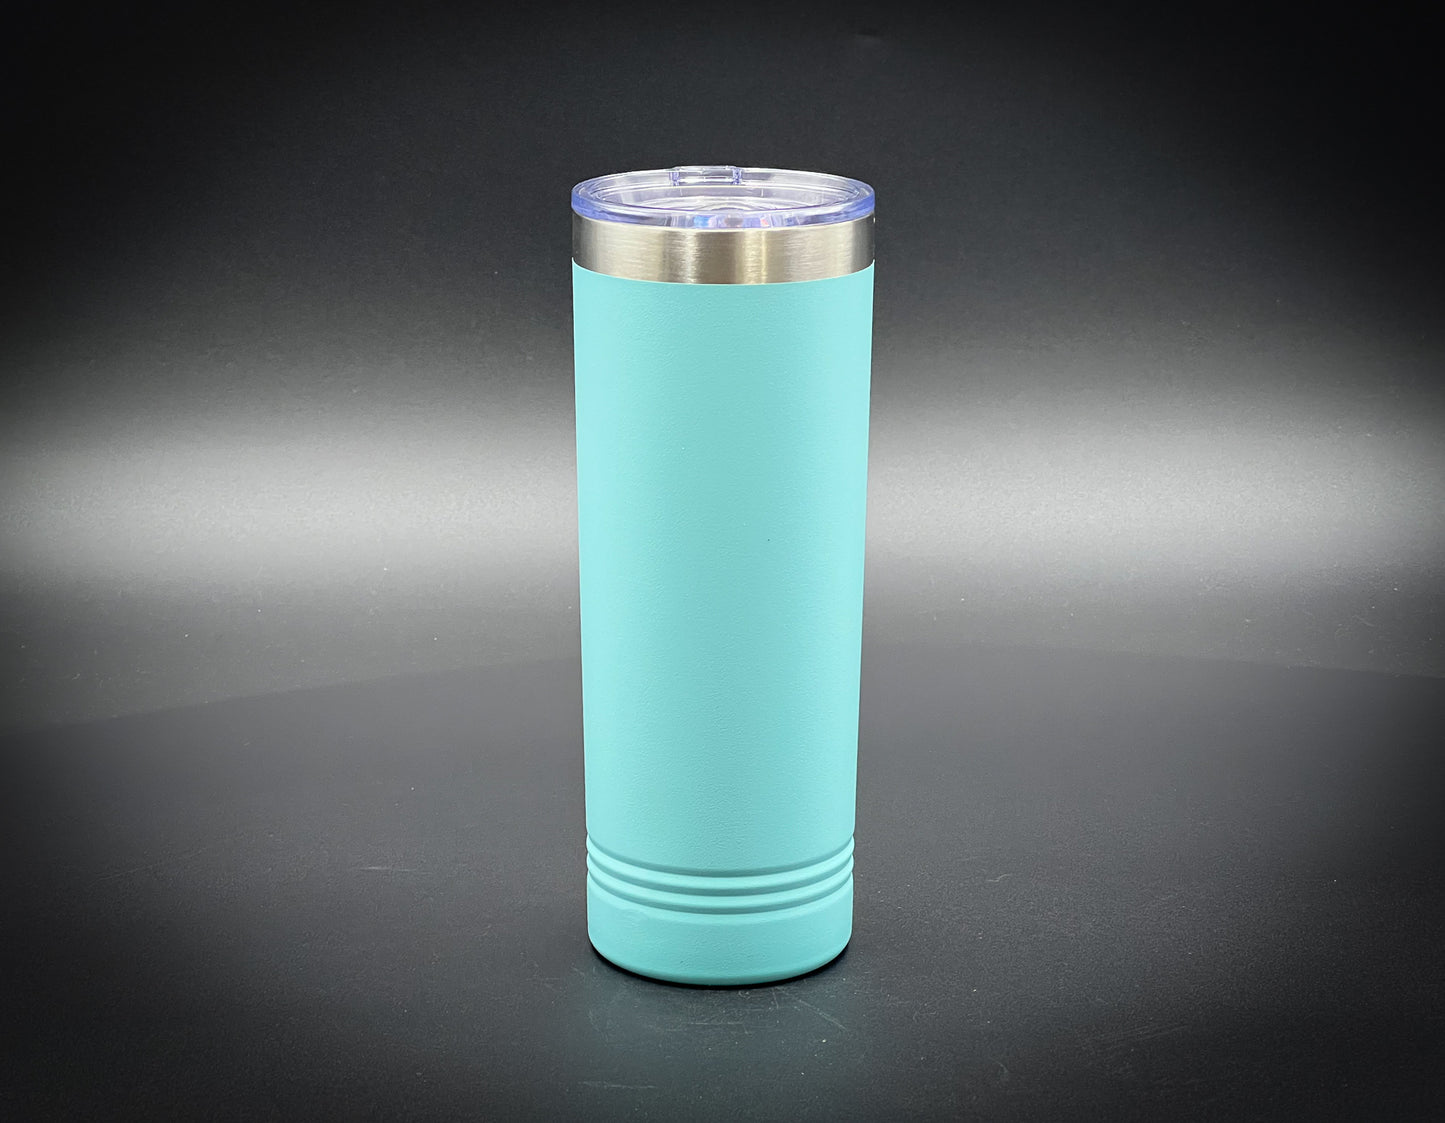 Lake George in a Compass 22 oz Insulated Skinny Tumbler